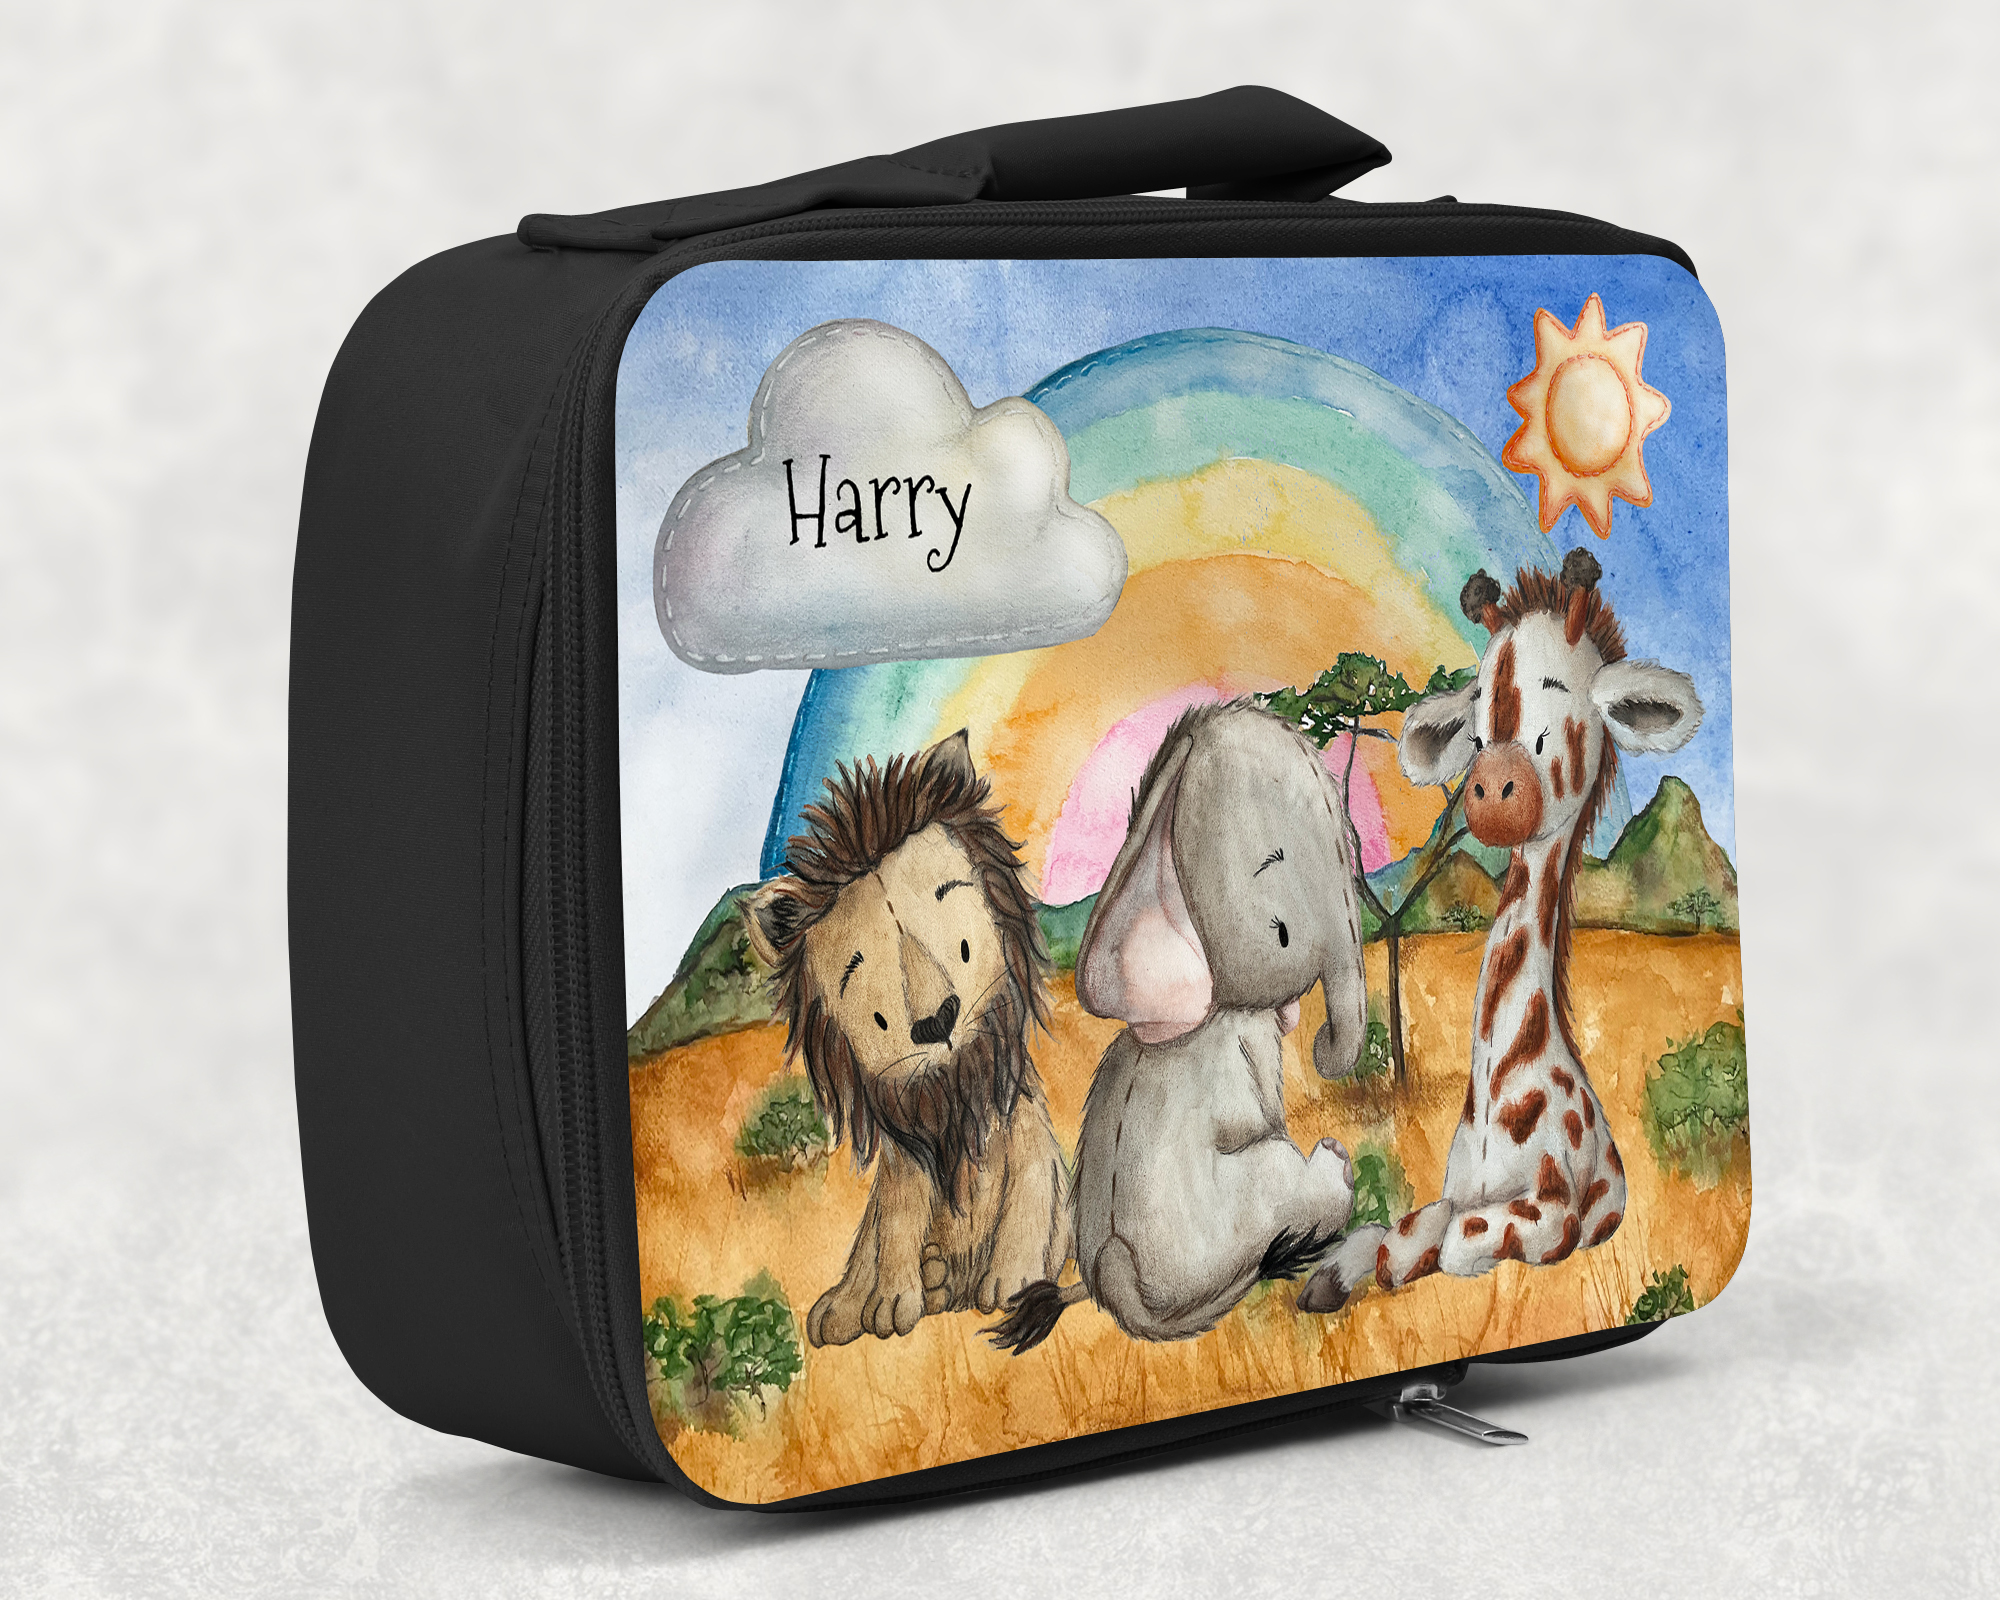 children's insulated lunch bag with bright colourful personalised printed design in safari, theme with elephant, lion and giraffe. so cute